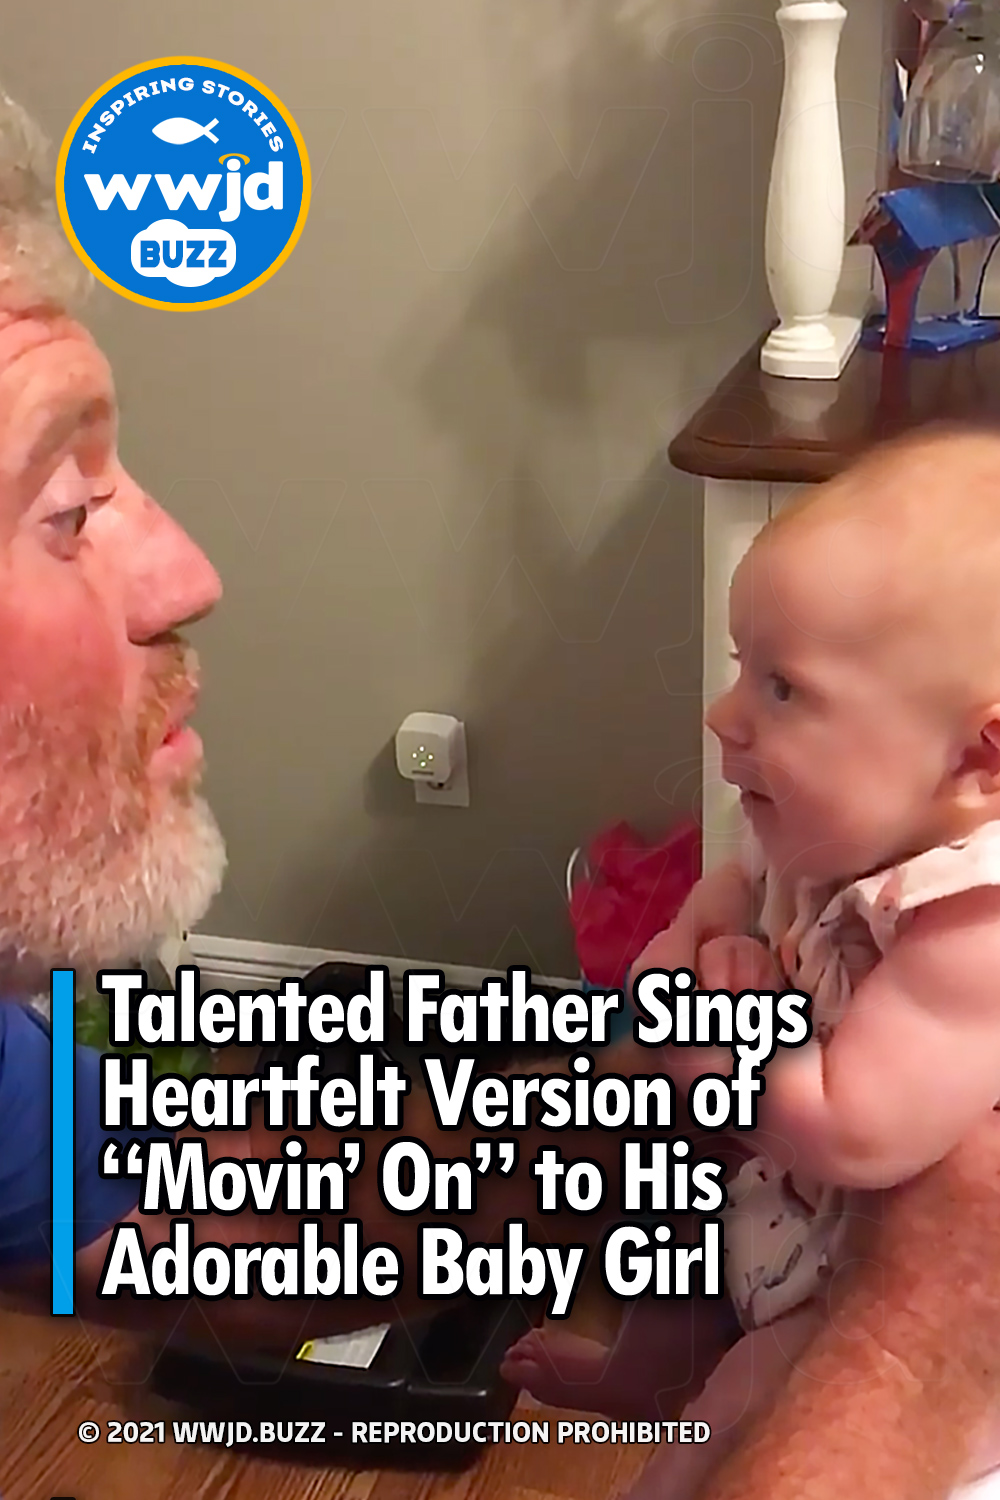 Talented Father Sings Heartfelt Version of “Movin’ On” to His Adorable Baby Girl